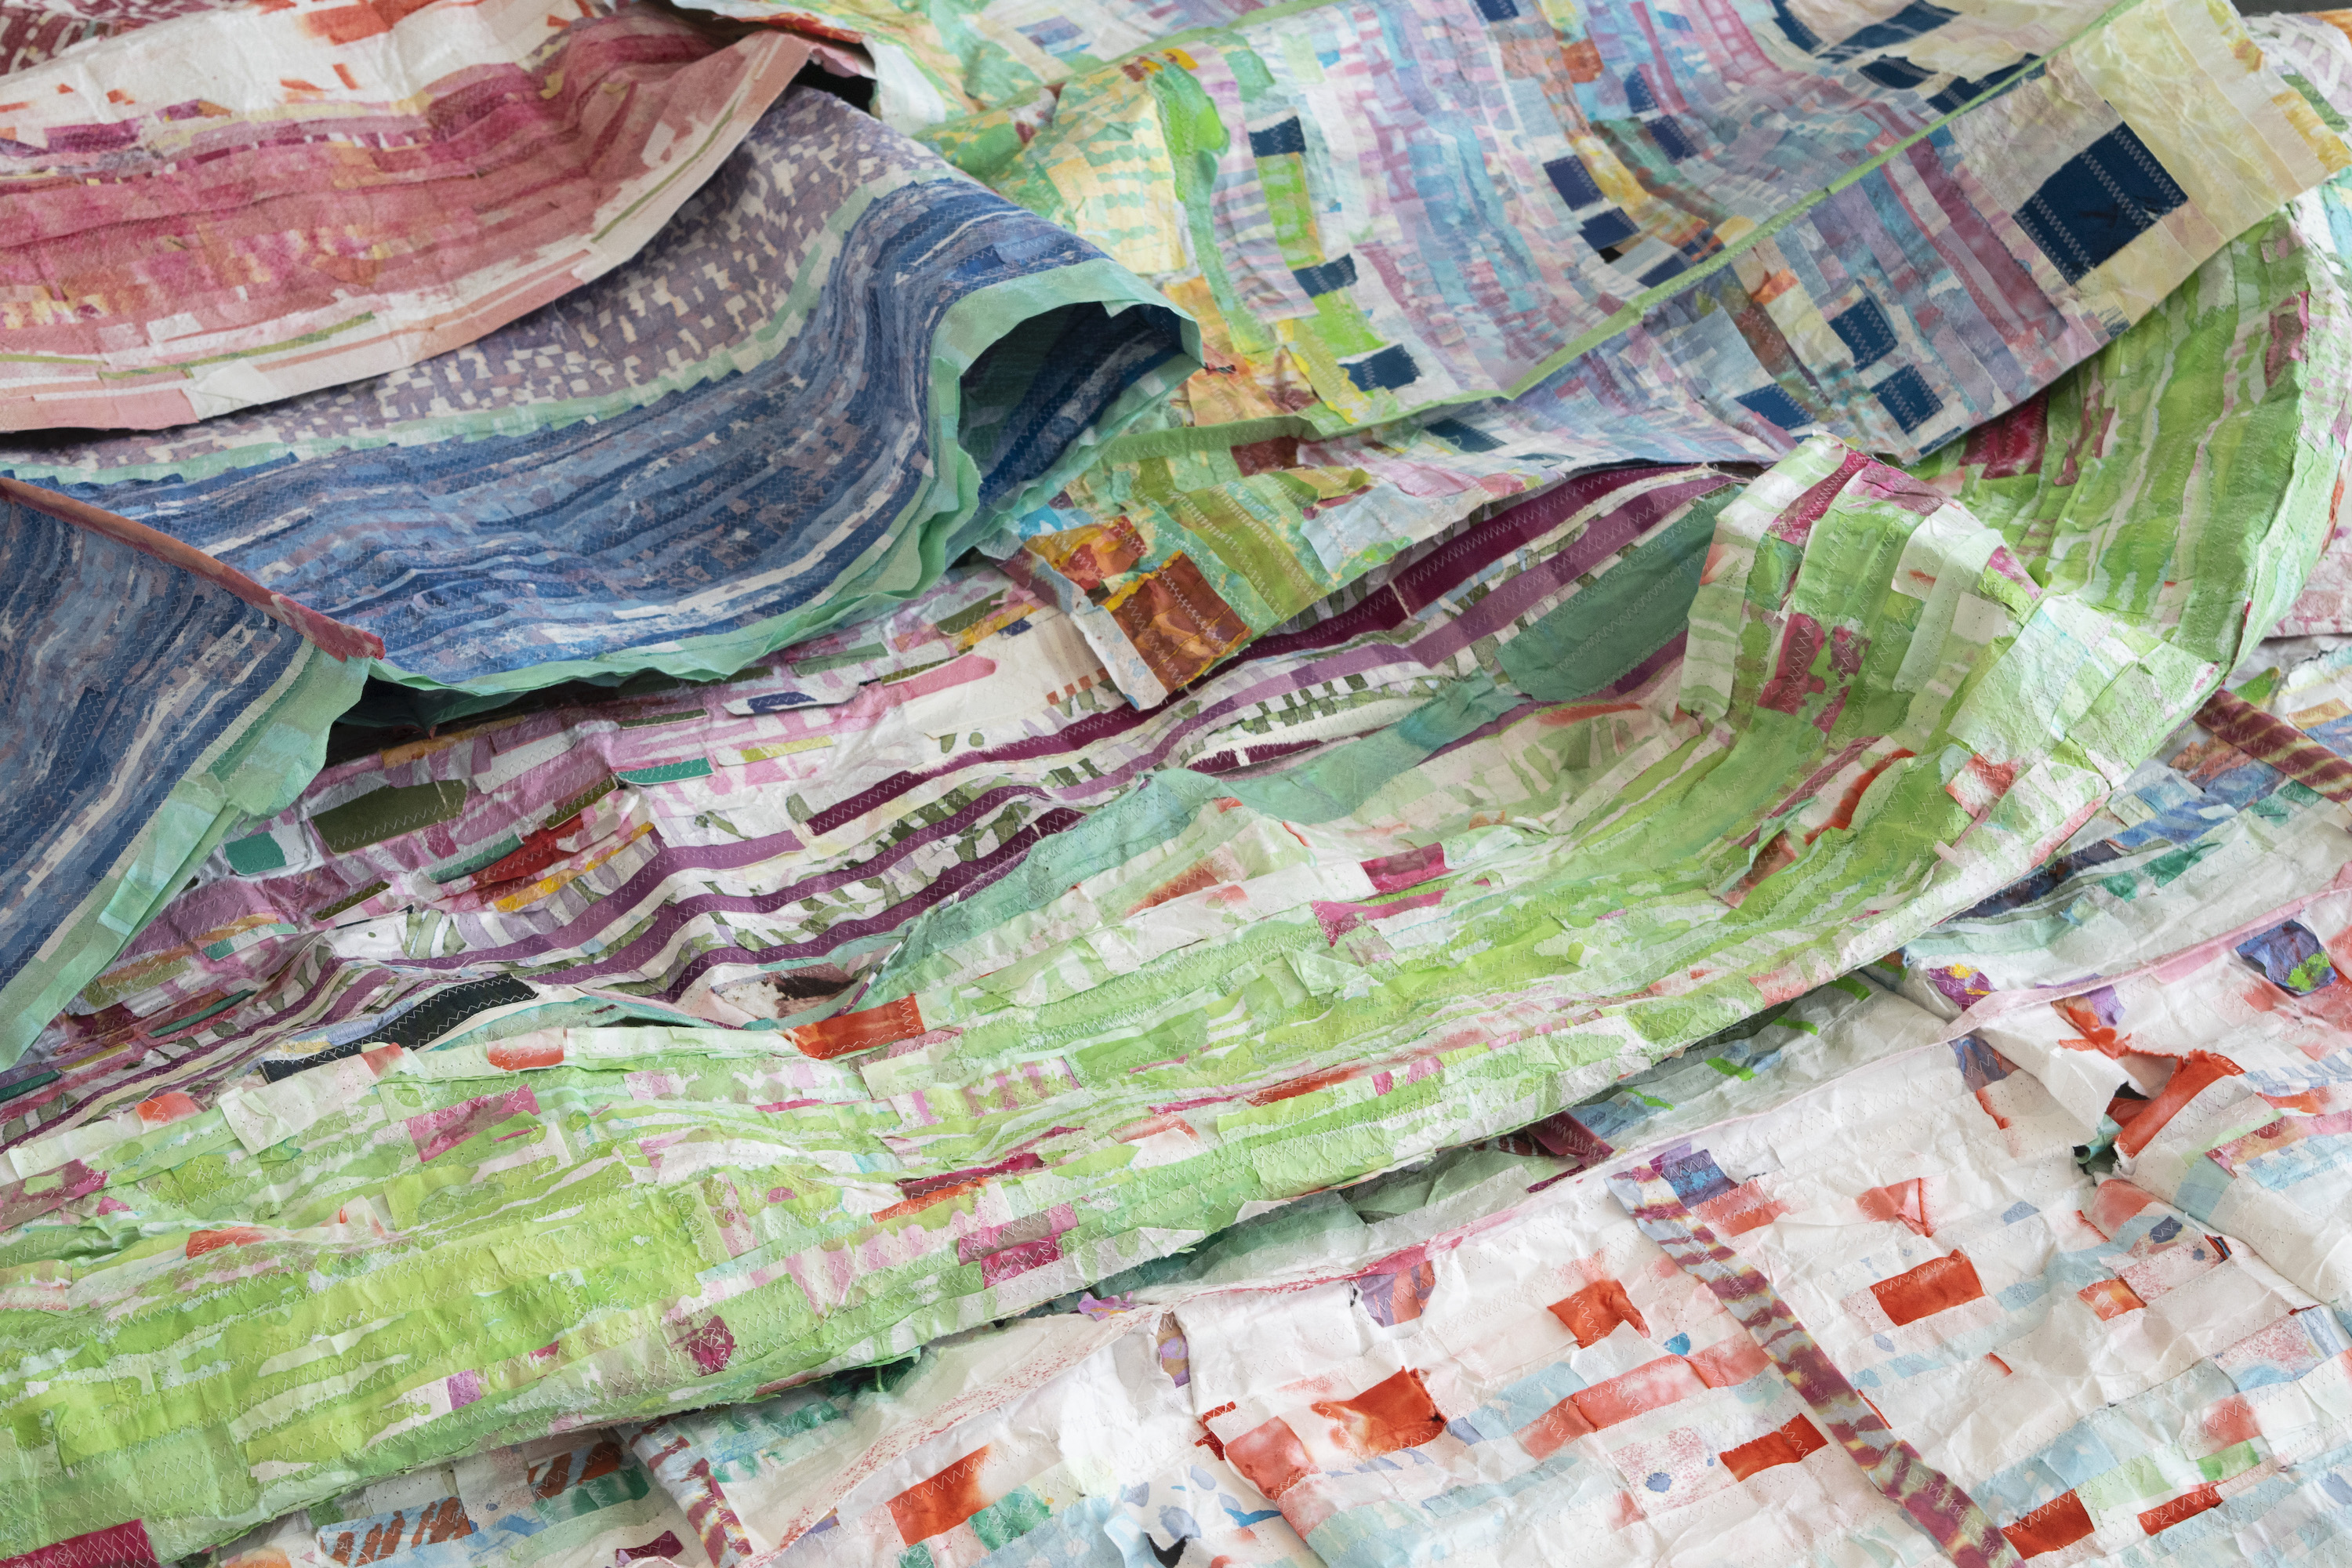 Photograph of several sewn paper quilt collages overlapping on the floor